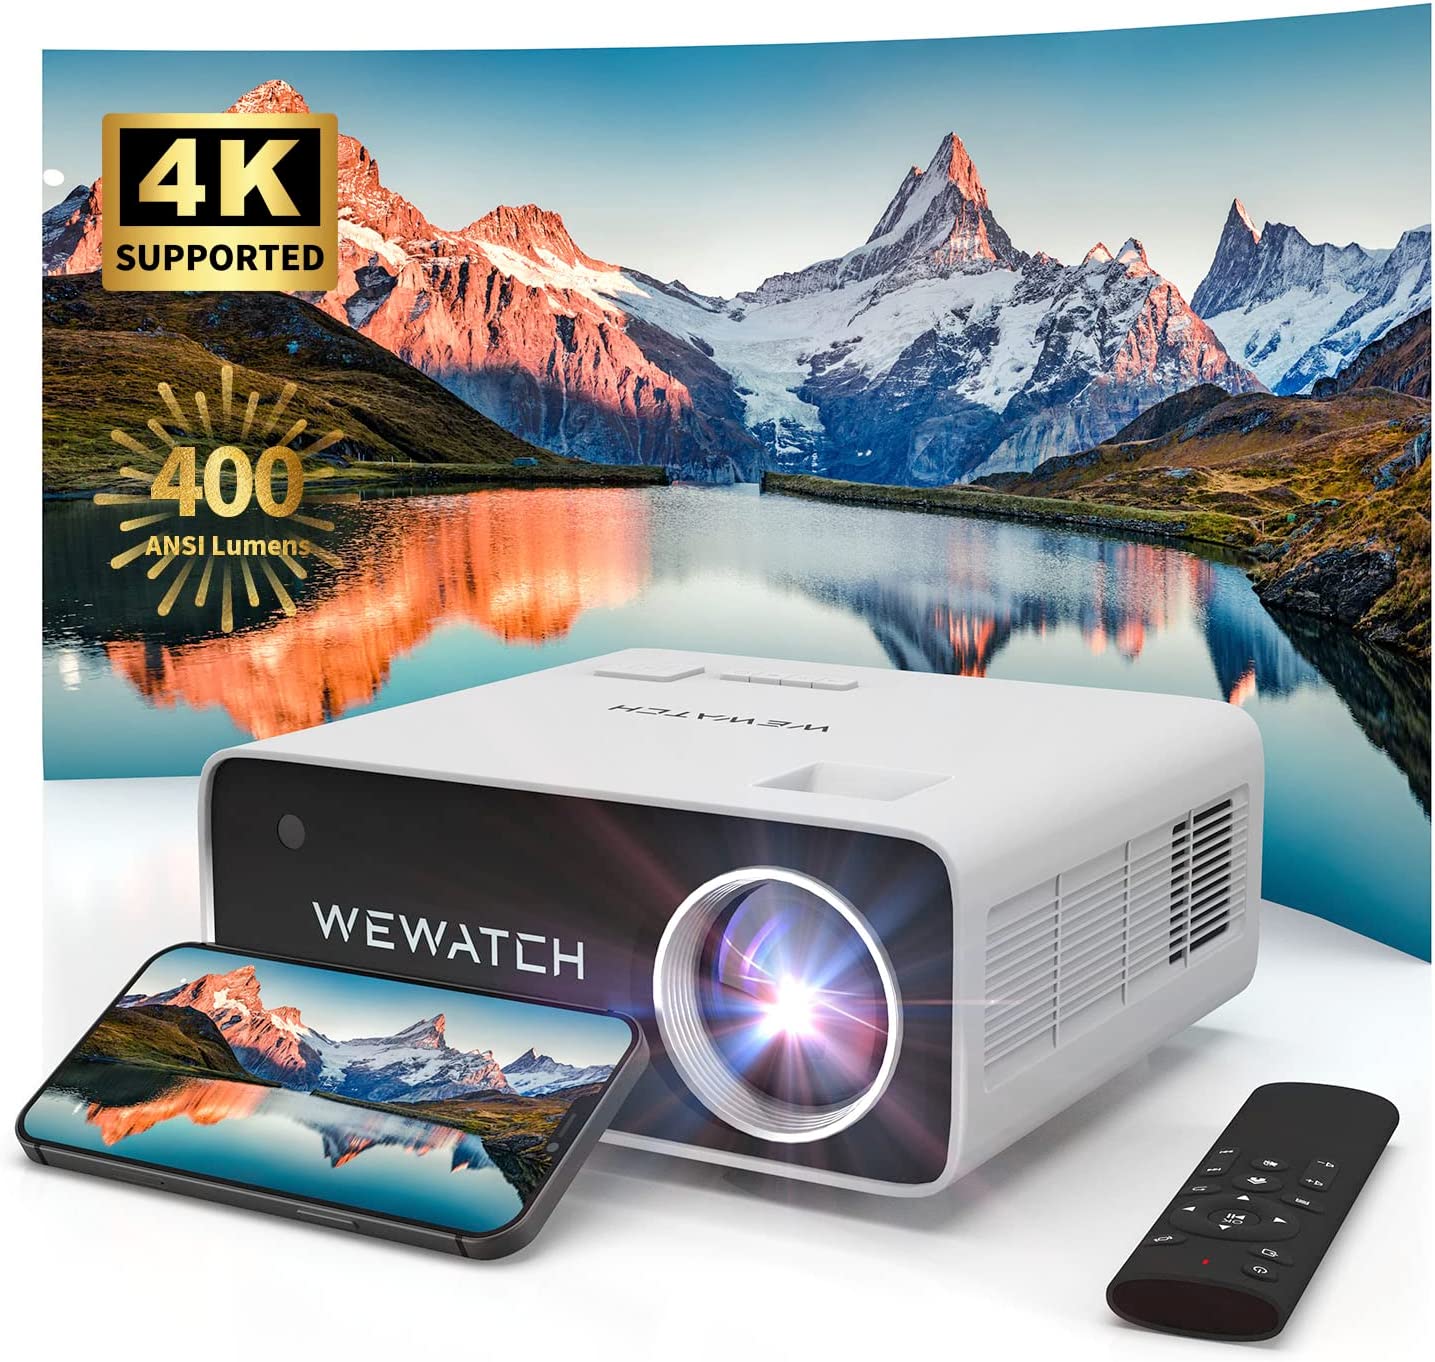 4k supported WEWATCH V51P Projector 